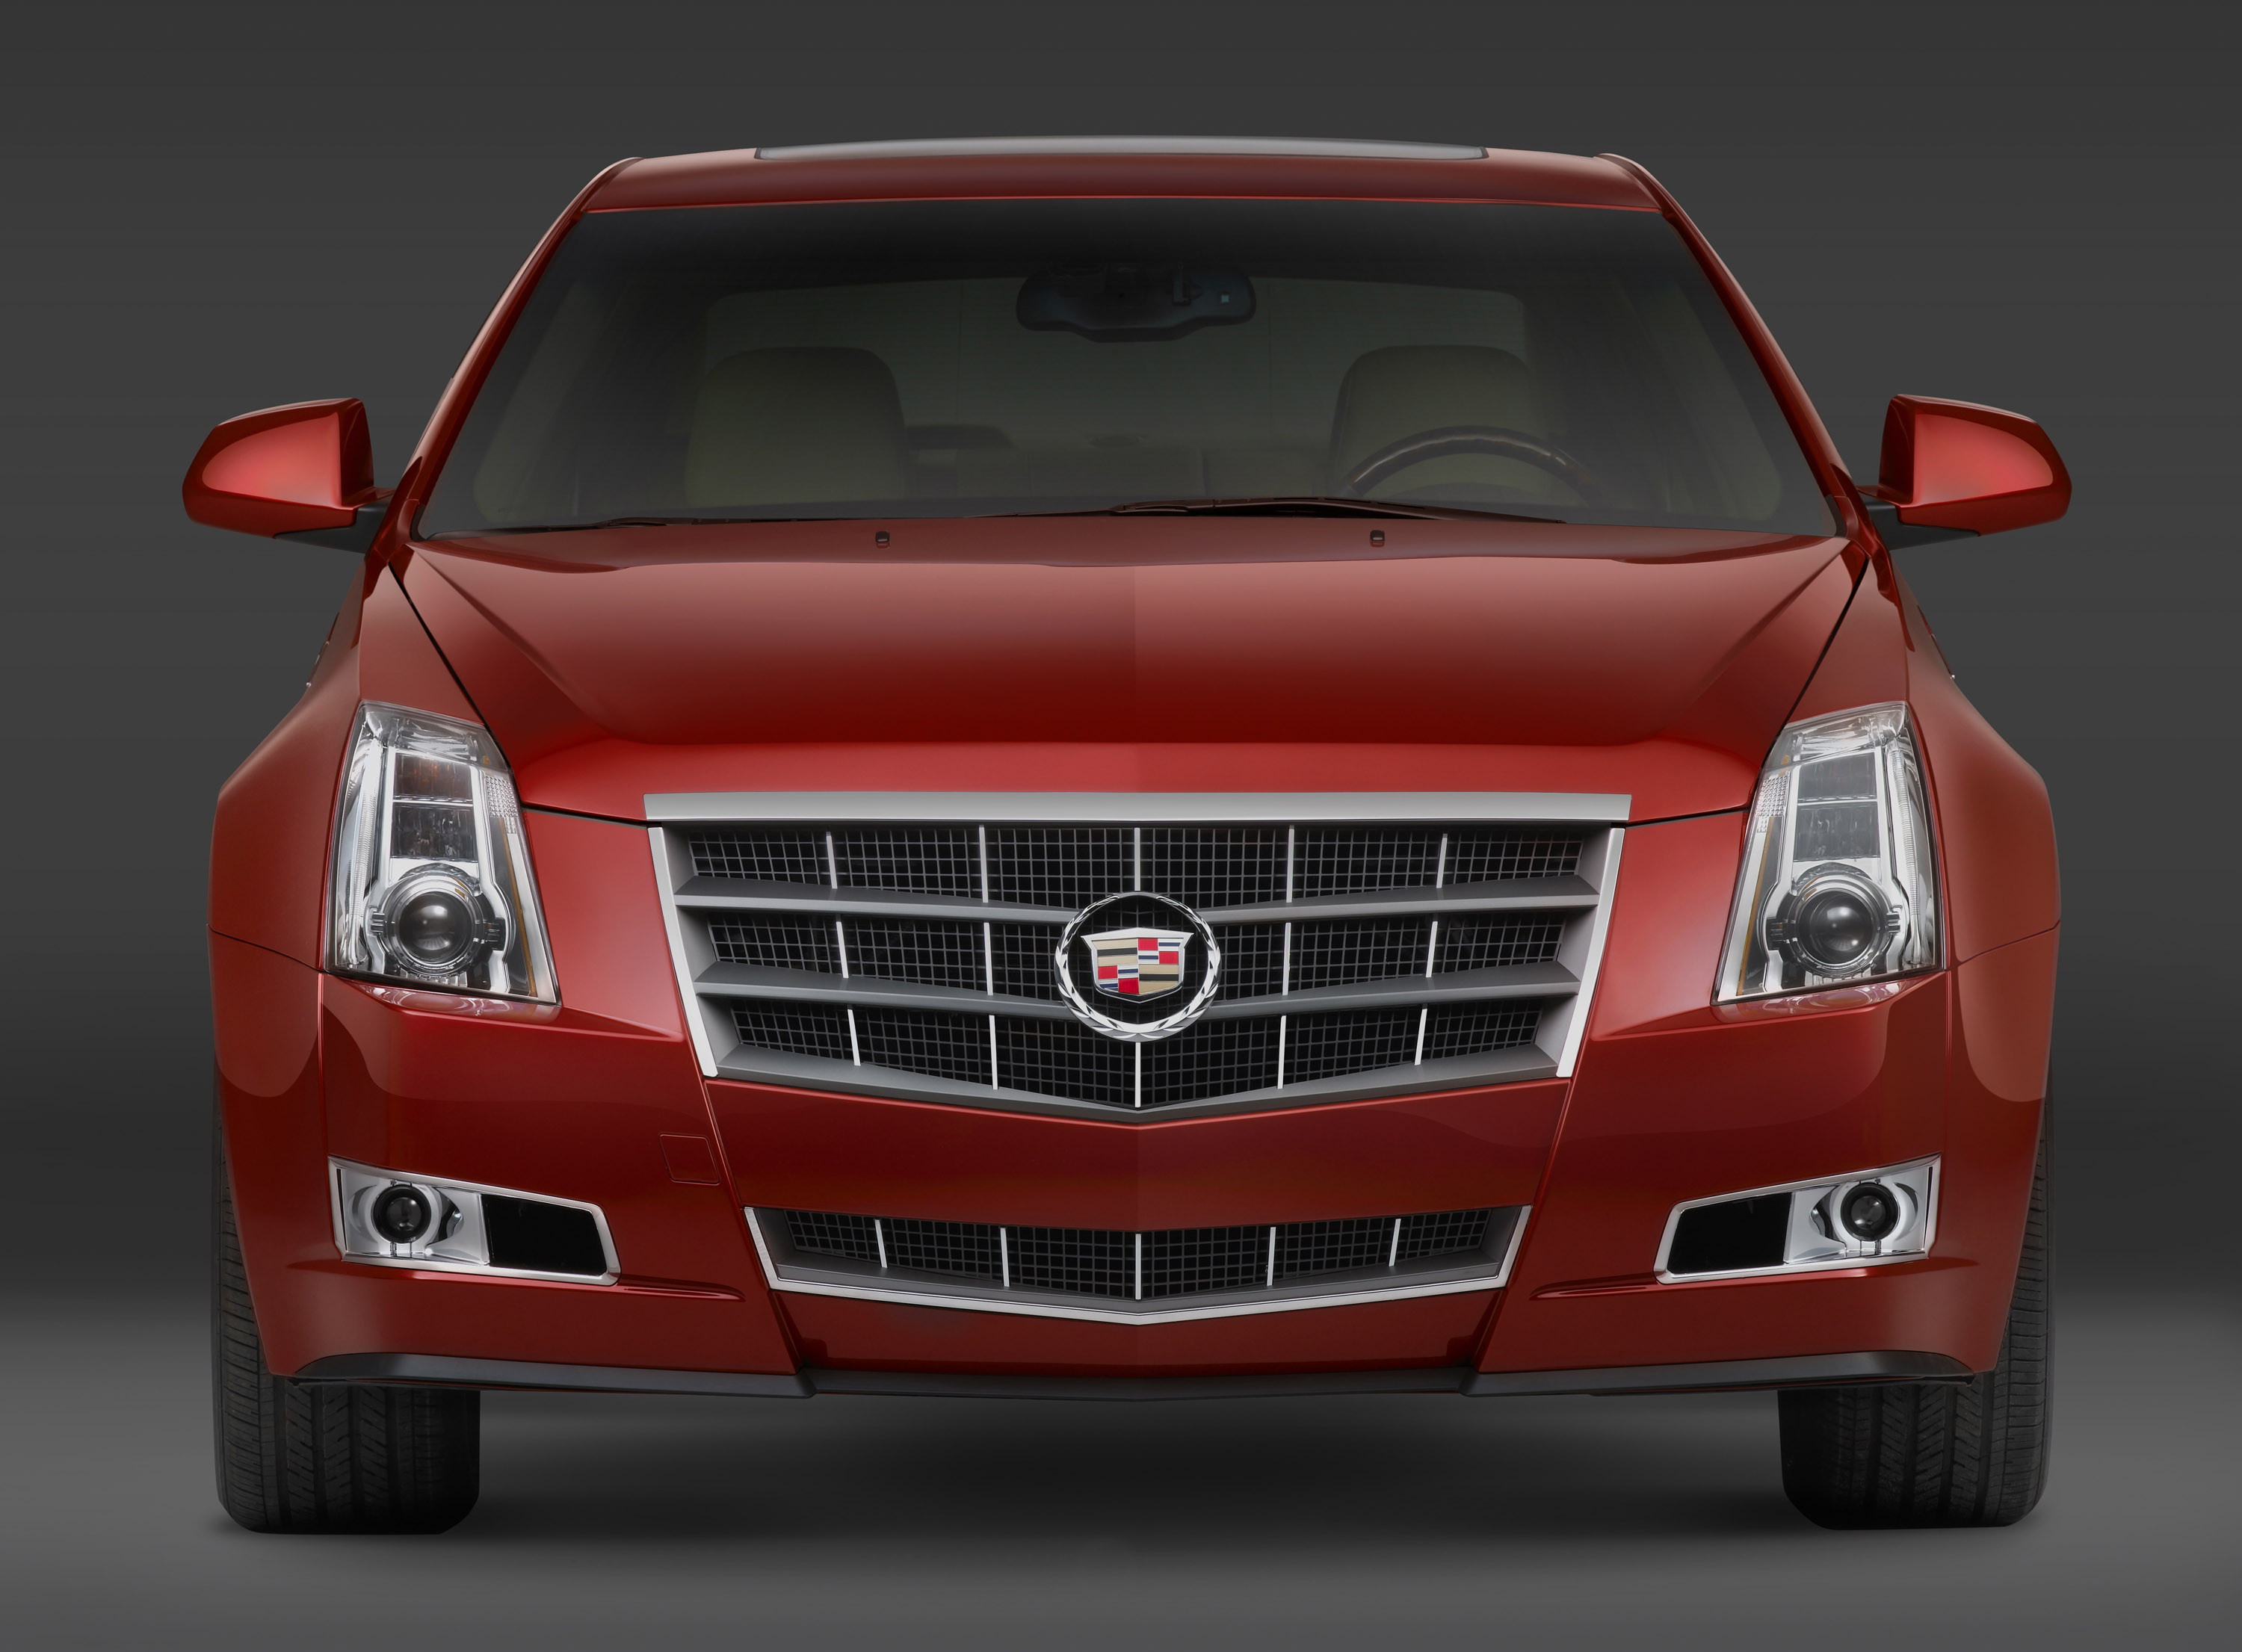 2009 Cadillac CTS – OVERVIEW